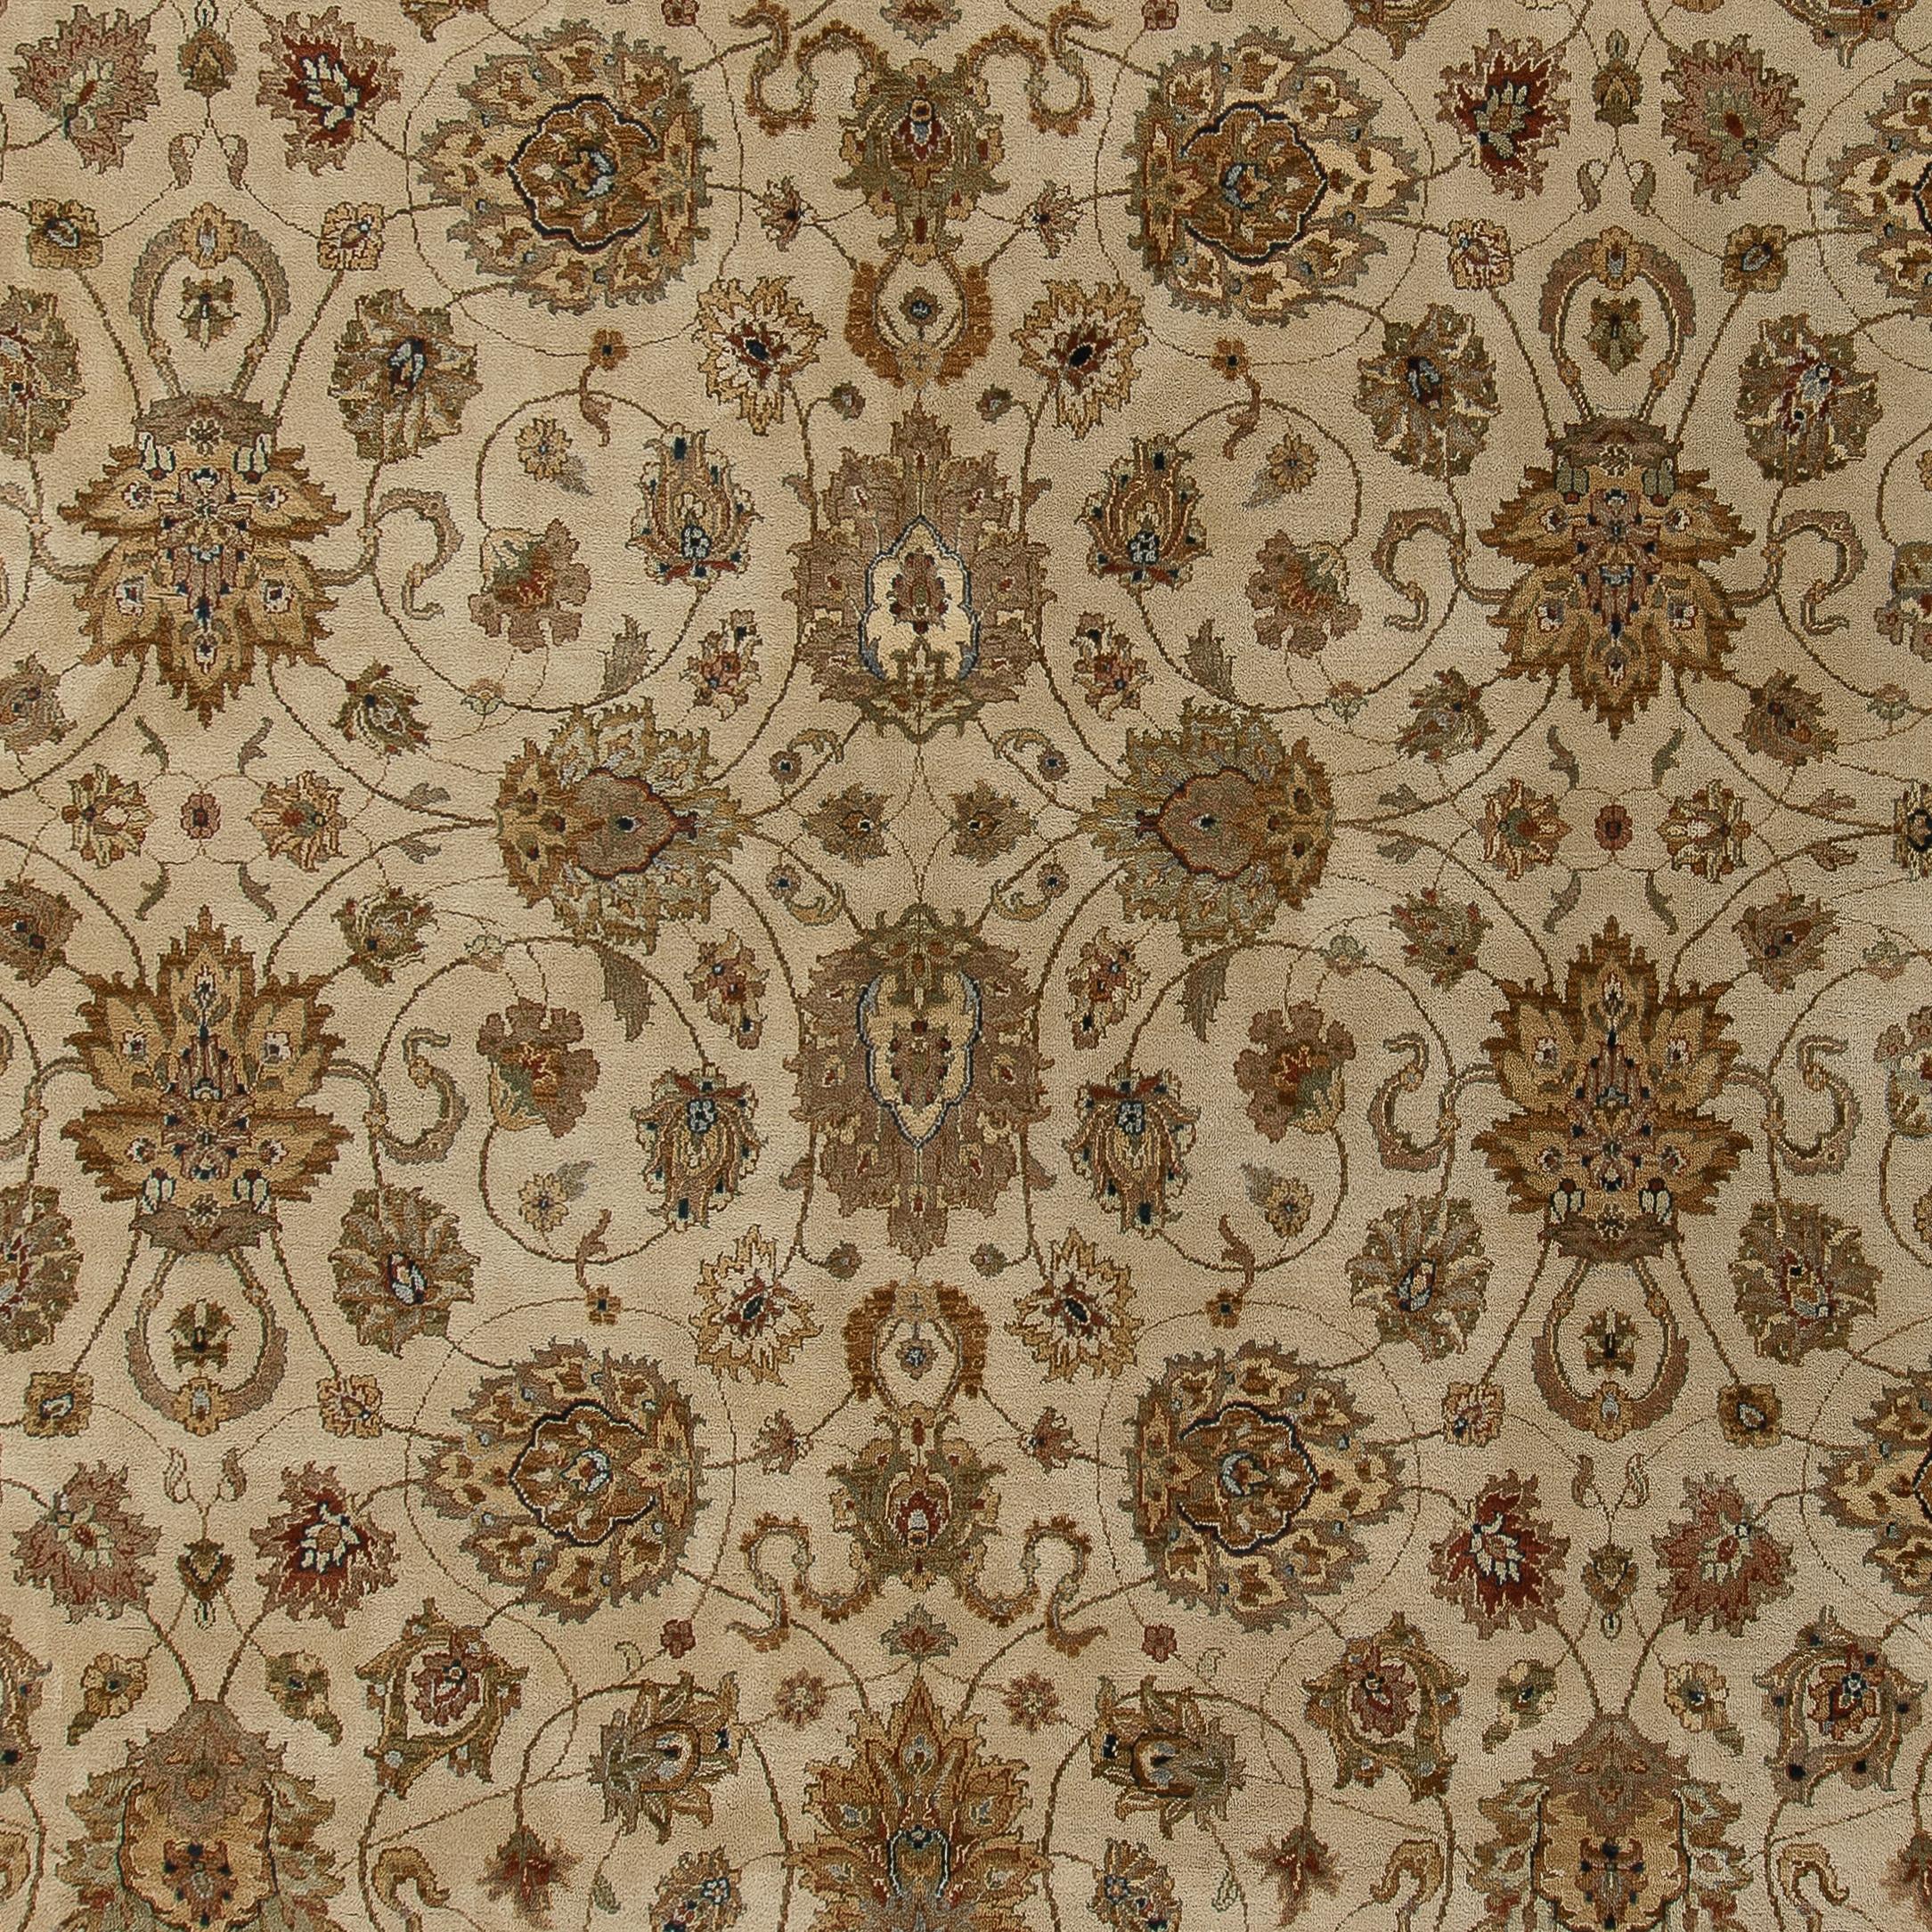 9x12 Ft New Oushak rug made of 100% soft wool & Natural Dyes featuring an all over design of large rosette and palmette motifs connected by leafy scrolls in soft, earthy hues of beige, green, reddish brown and camel.
Finely hand-knotted with even